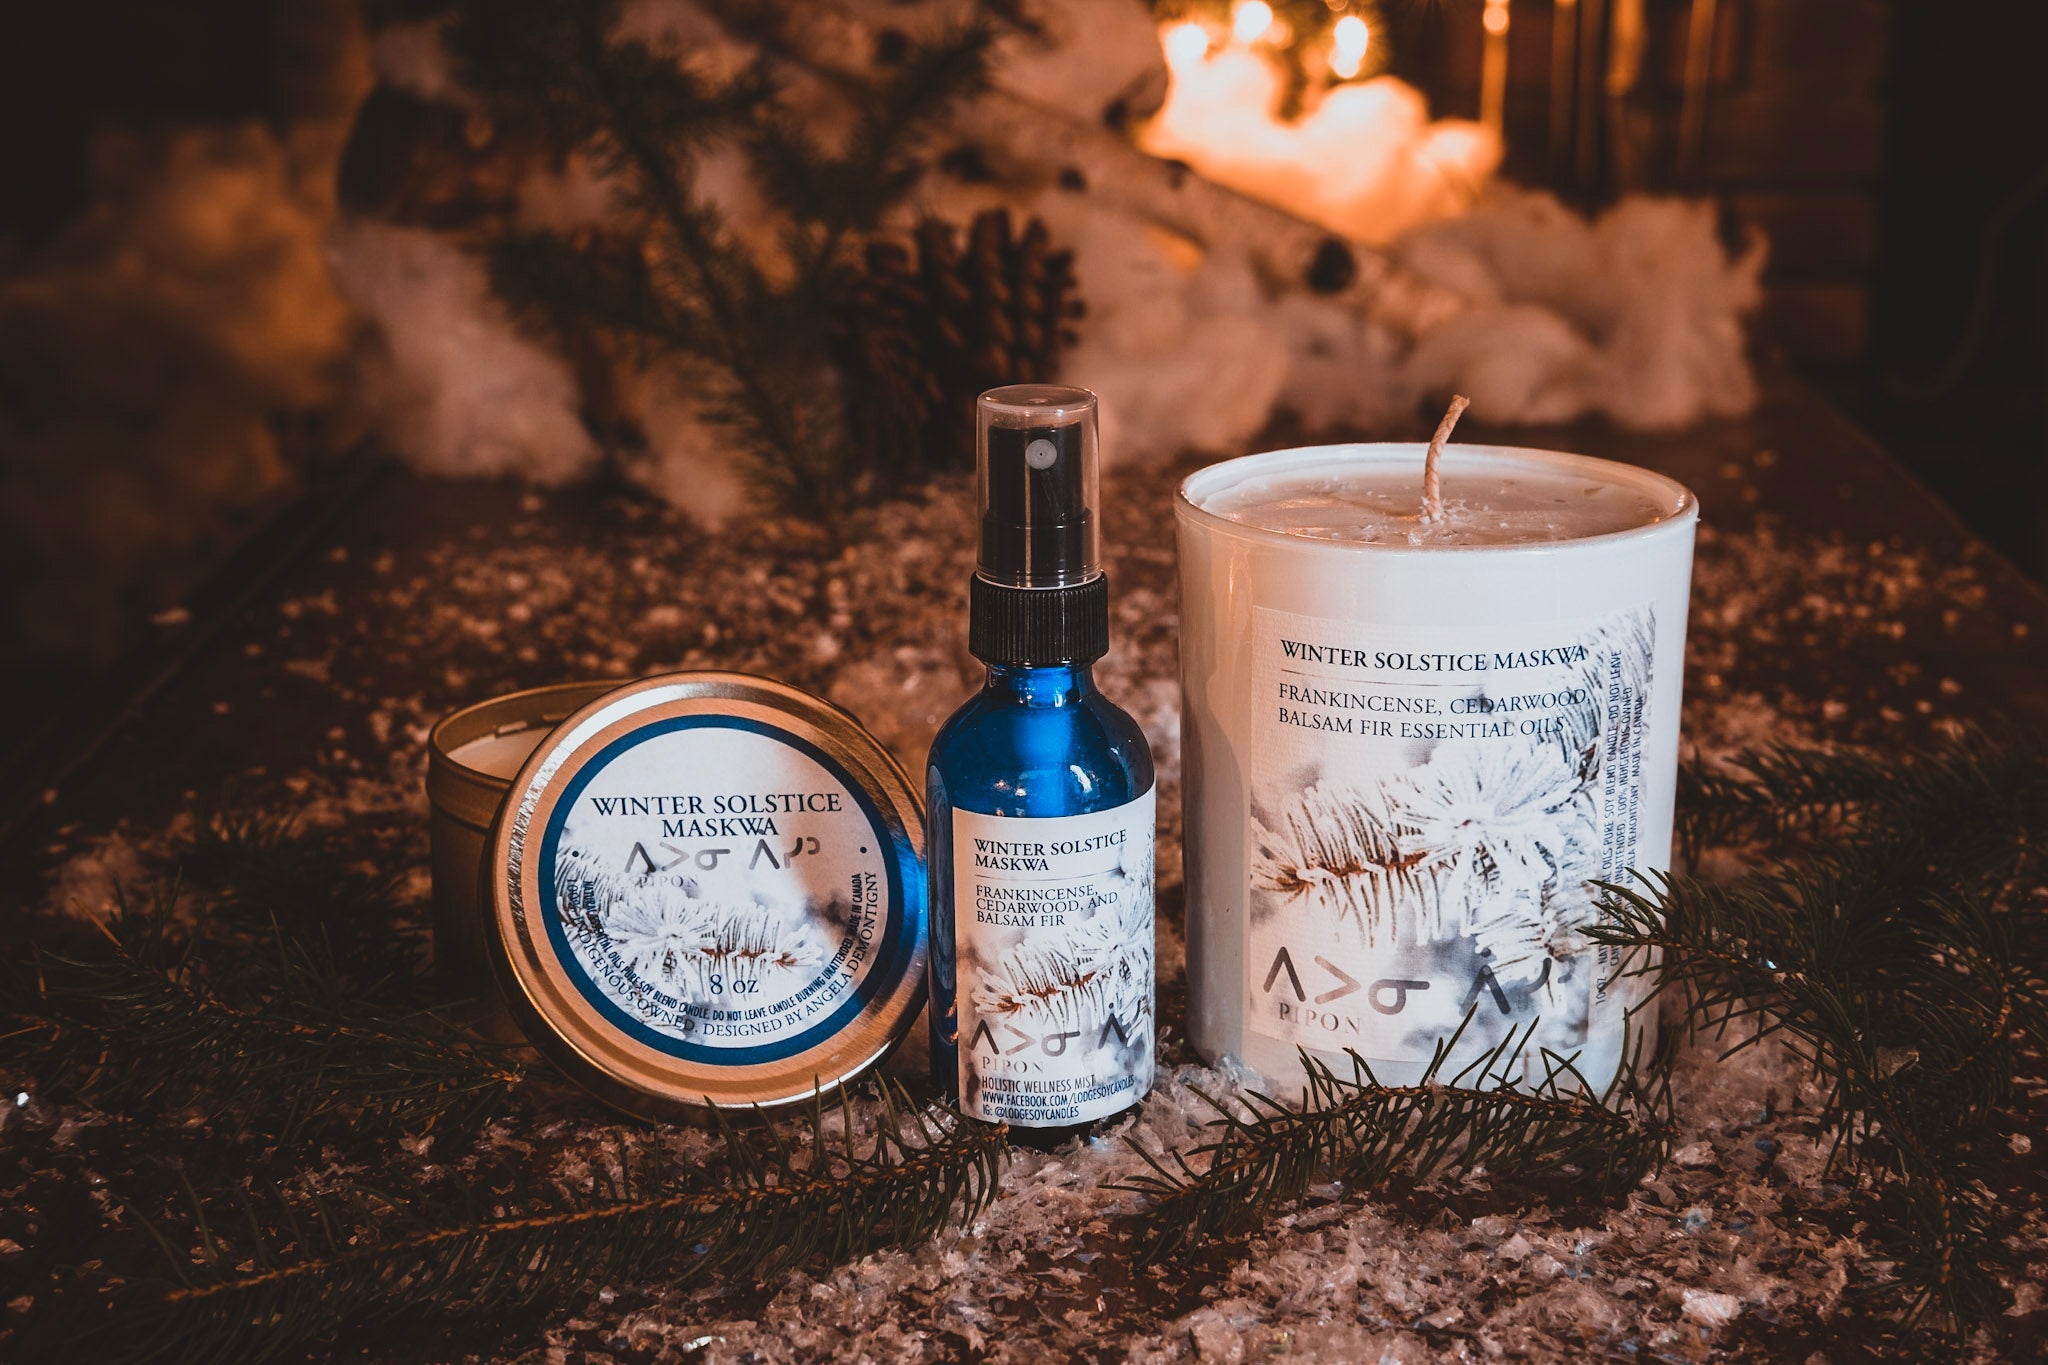 Winter Solstice Maskwa - Special Edition 2oz Holistic Wellness Mist - LODGE Soy Candles